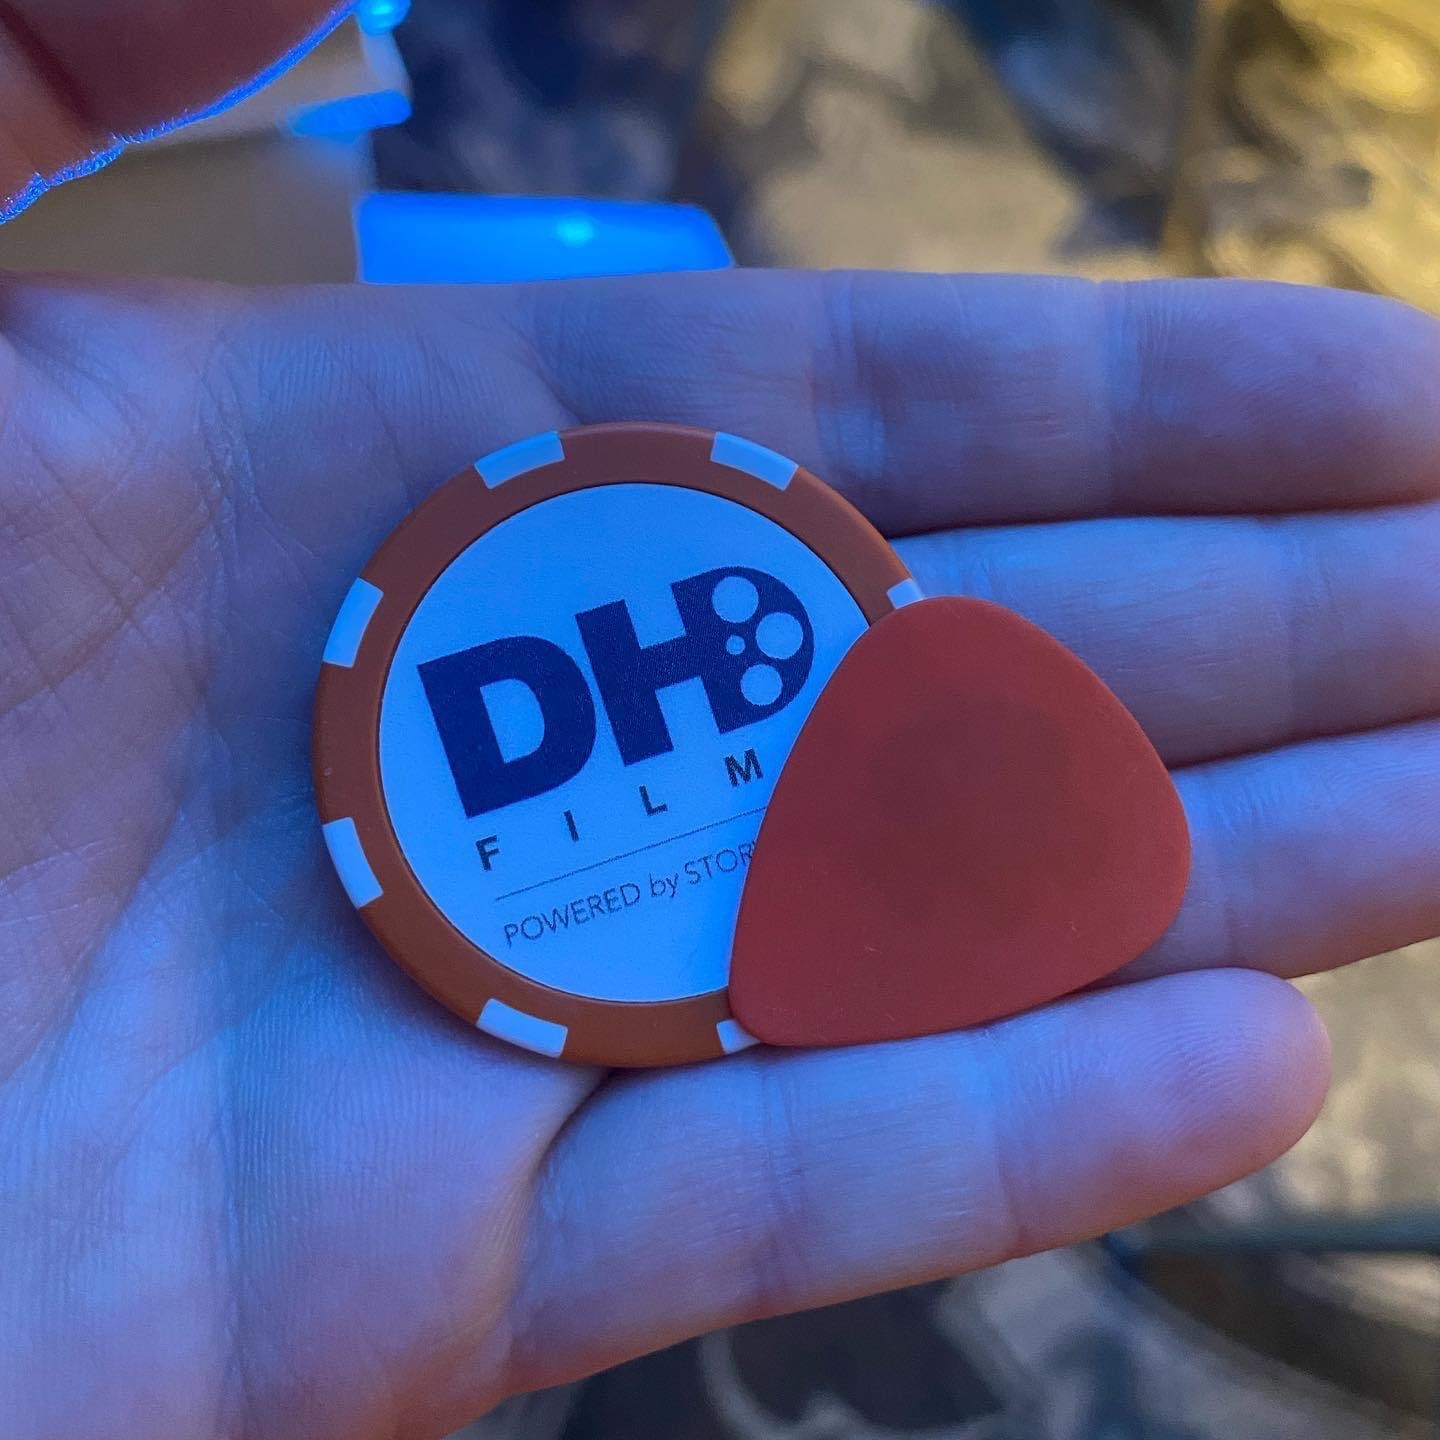 Our Head of Sales & Marketing, Aubri Nowowiejski, was invited by Visit San Antonio to deliver a motivational keynote to over 80 event service professionals. Her message was inspired by our "all in" poker chips, that we use to recognize rock star team members. The theme of this event was rock 'n' roll, so guitar picks were used in place of poker chips.

#videoproduction #videomarketing #production